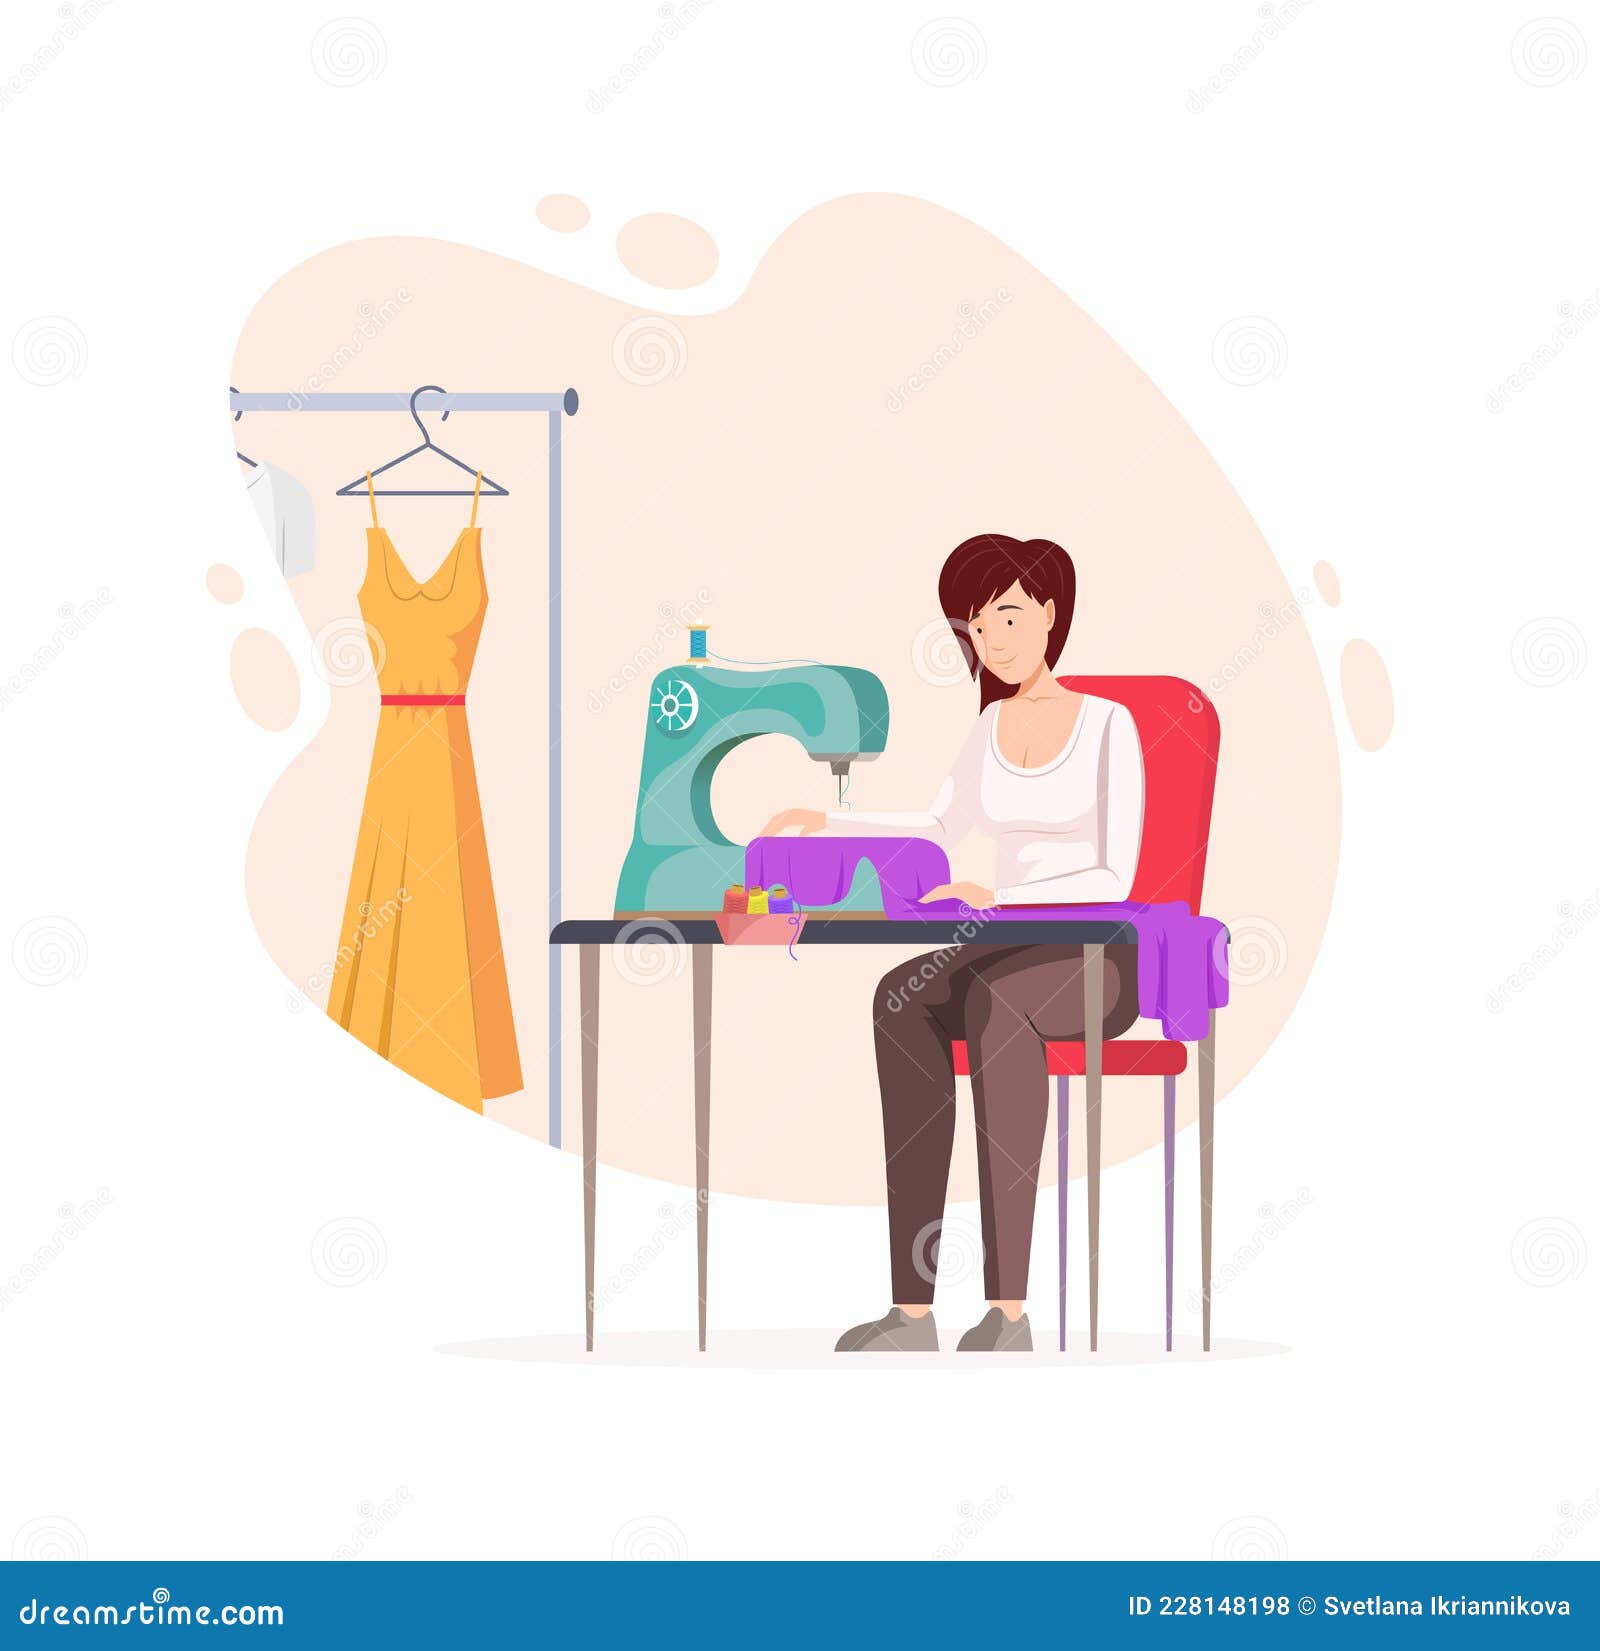 Pop Art Woman Dressmaker Seamstress or Sewer Sketch Illustration at Sewing  Machine Stock Vector - Illustration of isolated, beautiful: 108911494